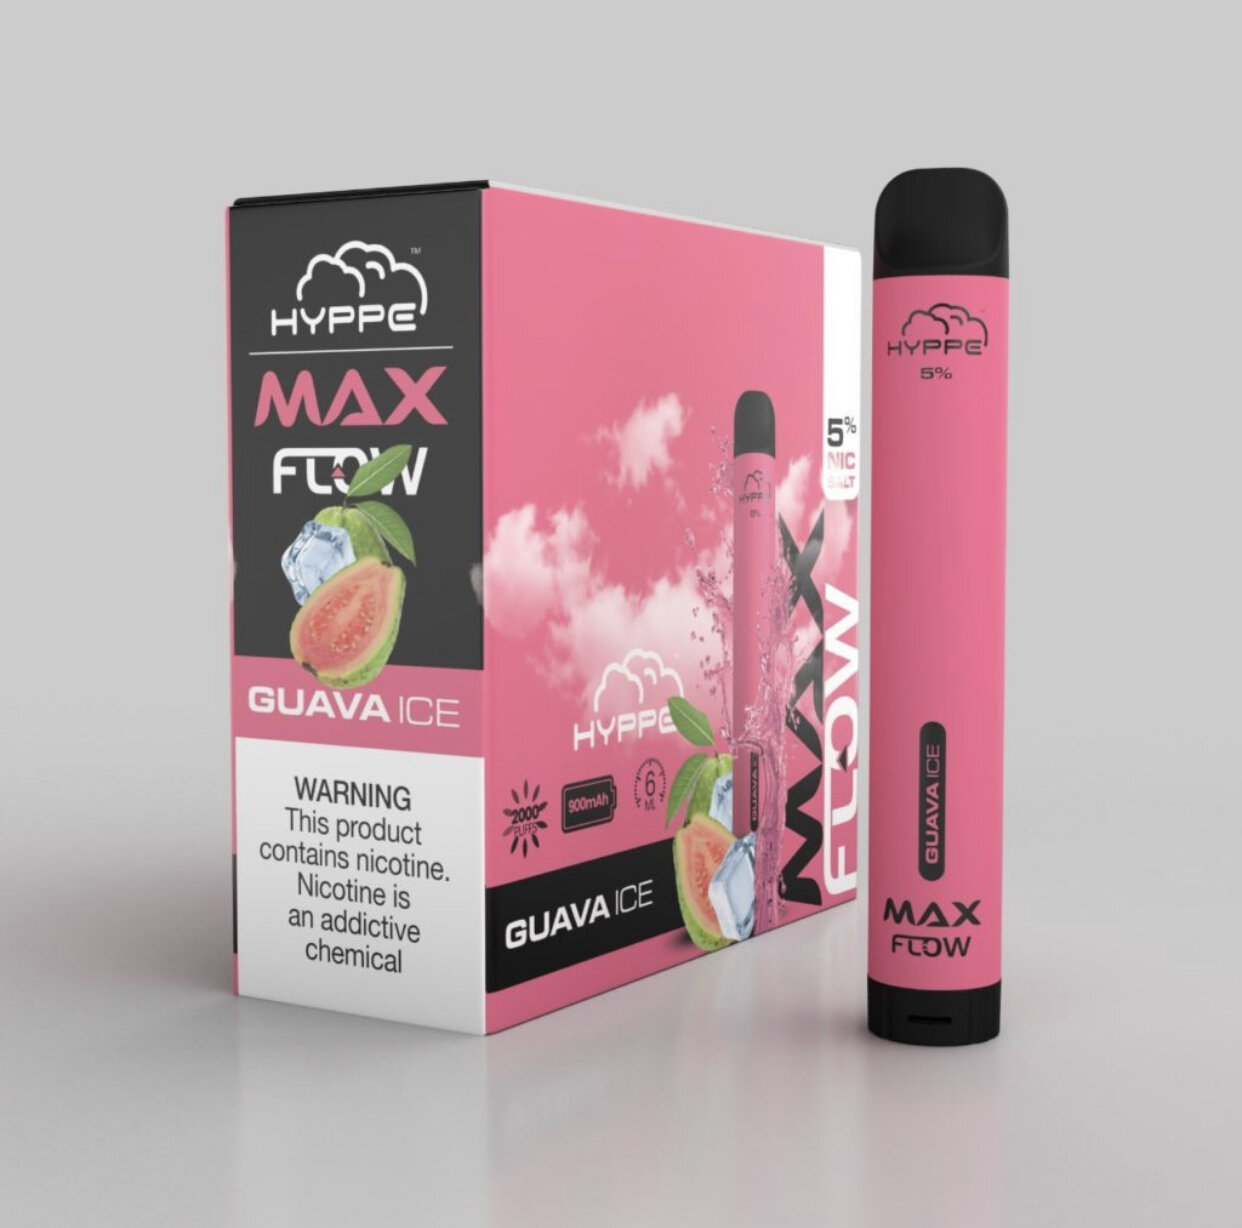 Hyppe Max Flow 5% Guava Ice